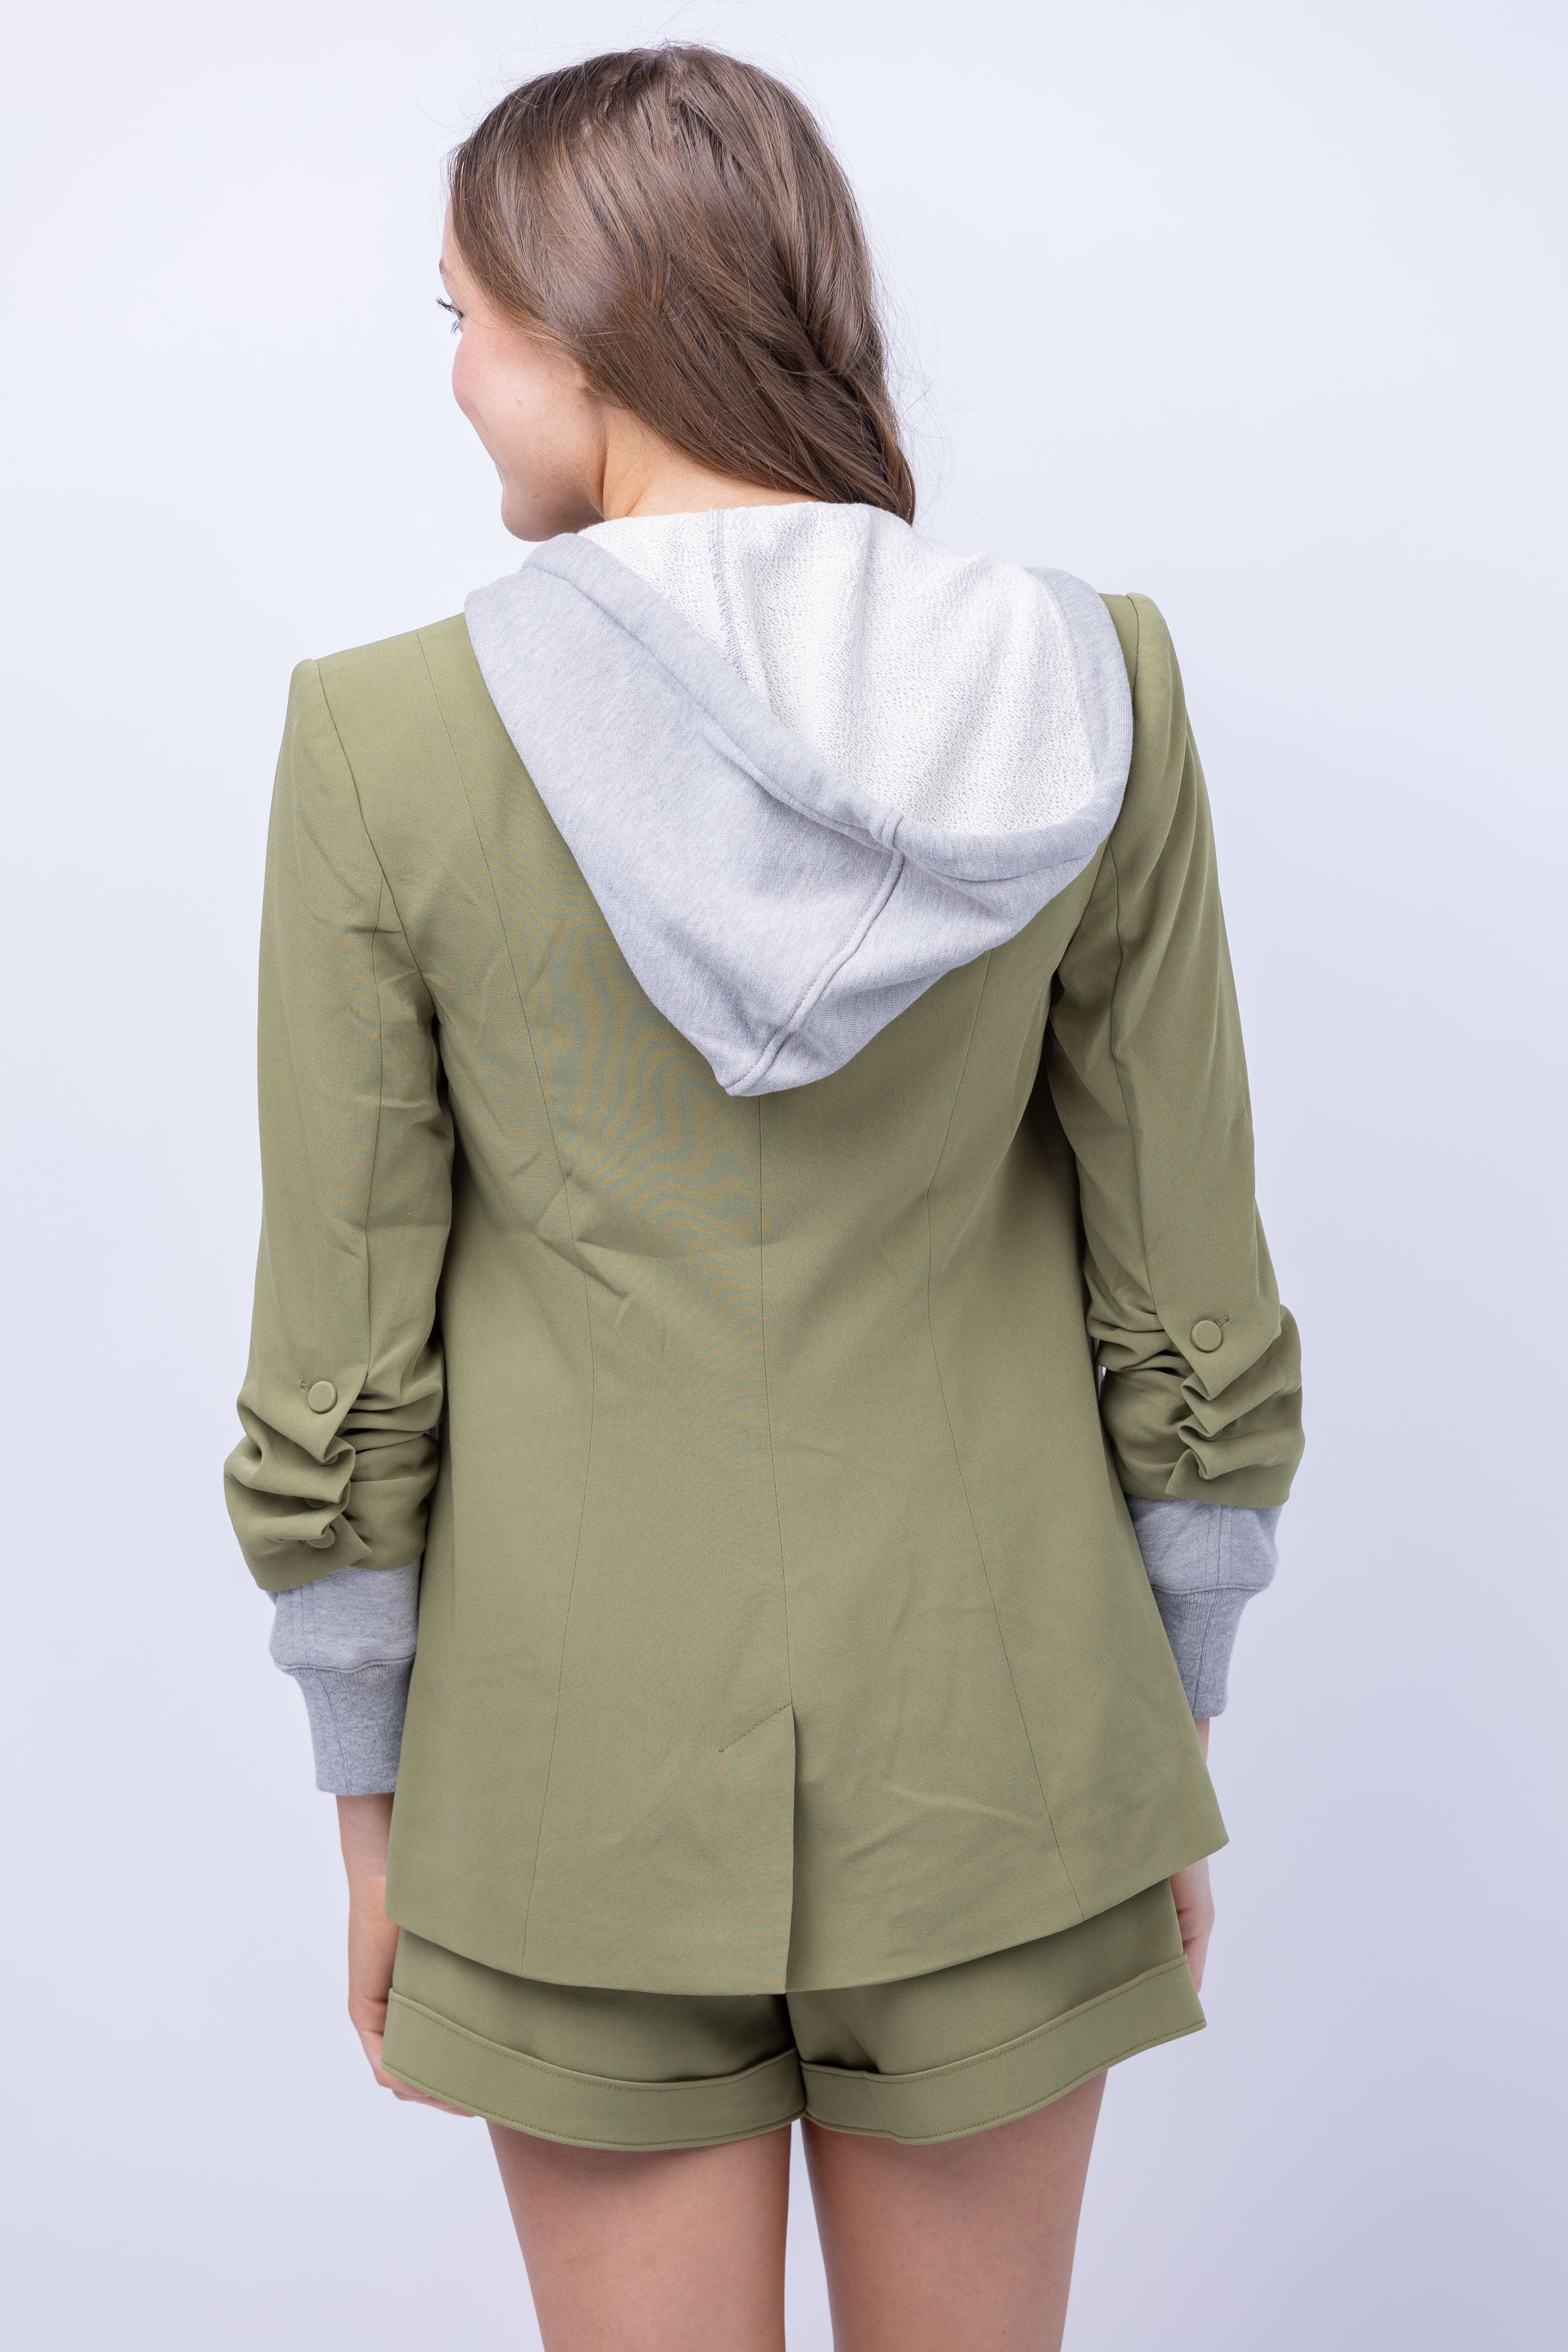 Cinq a Sept Hoodie Khloe Jacket in Olive Green Heather